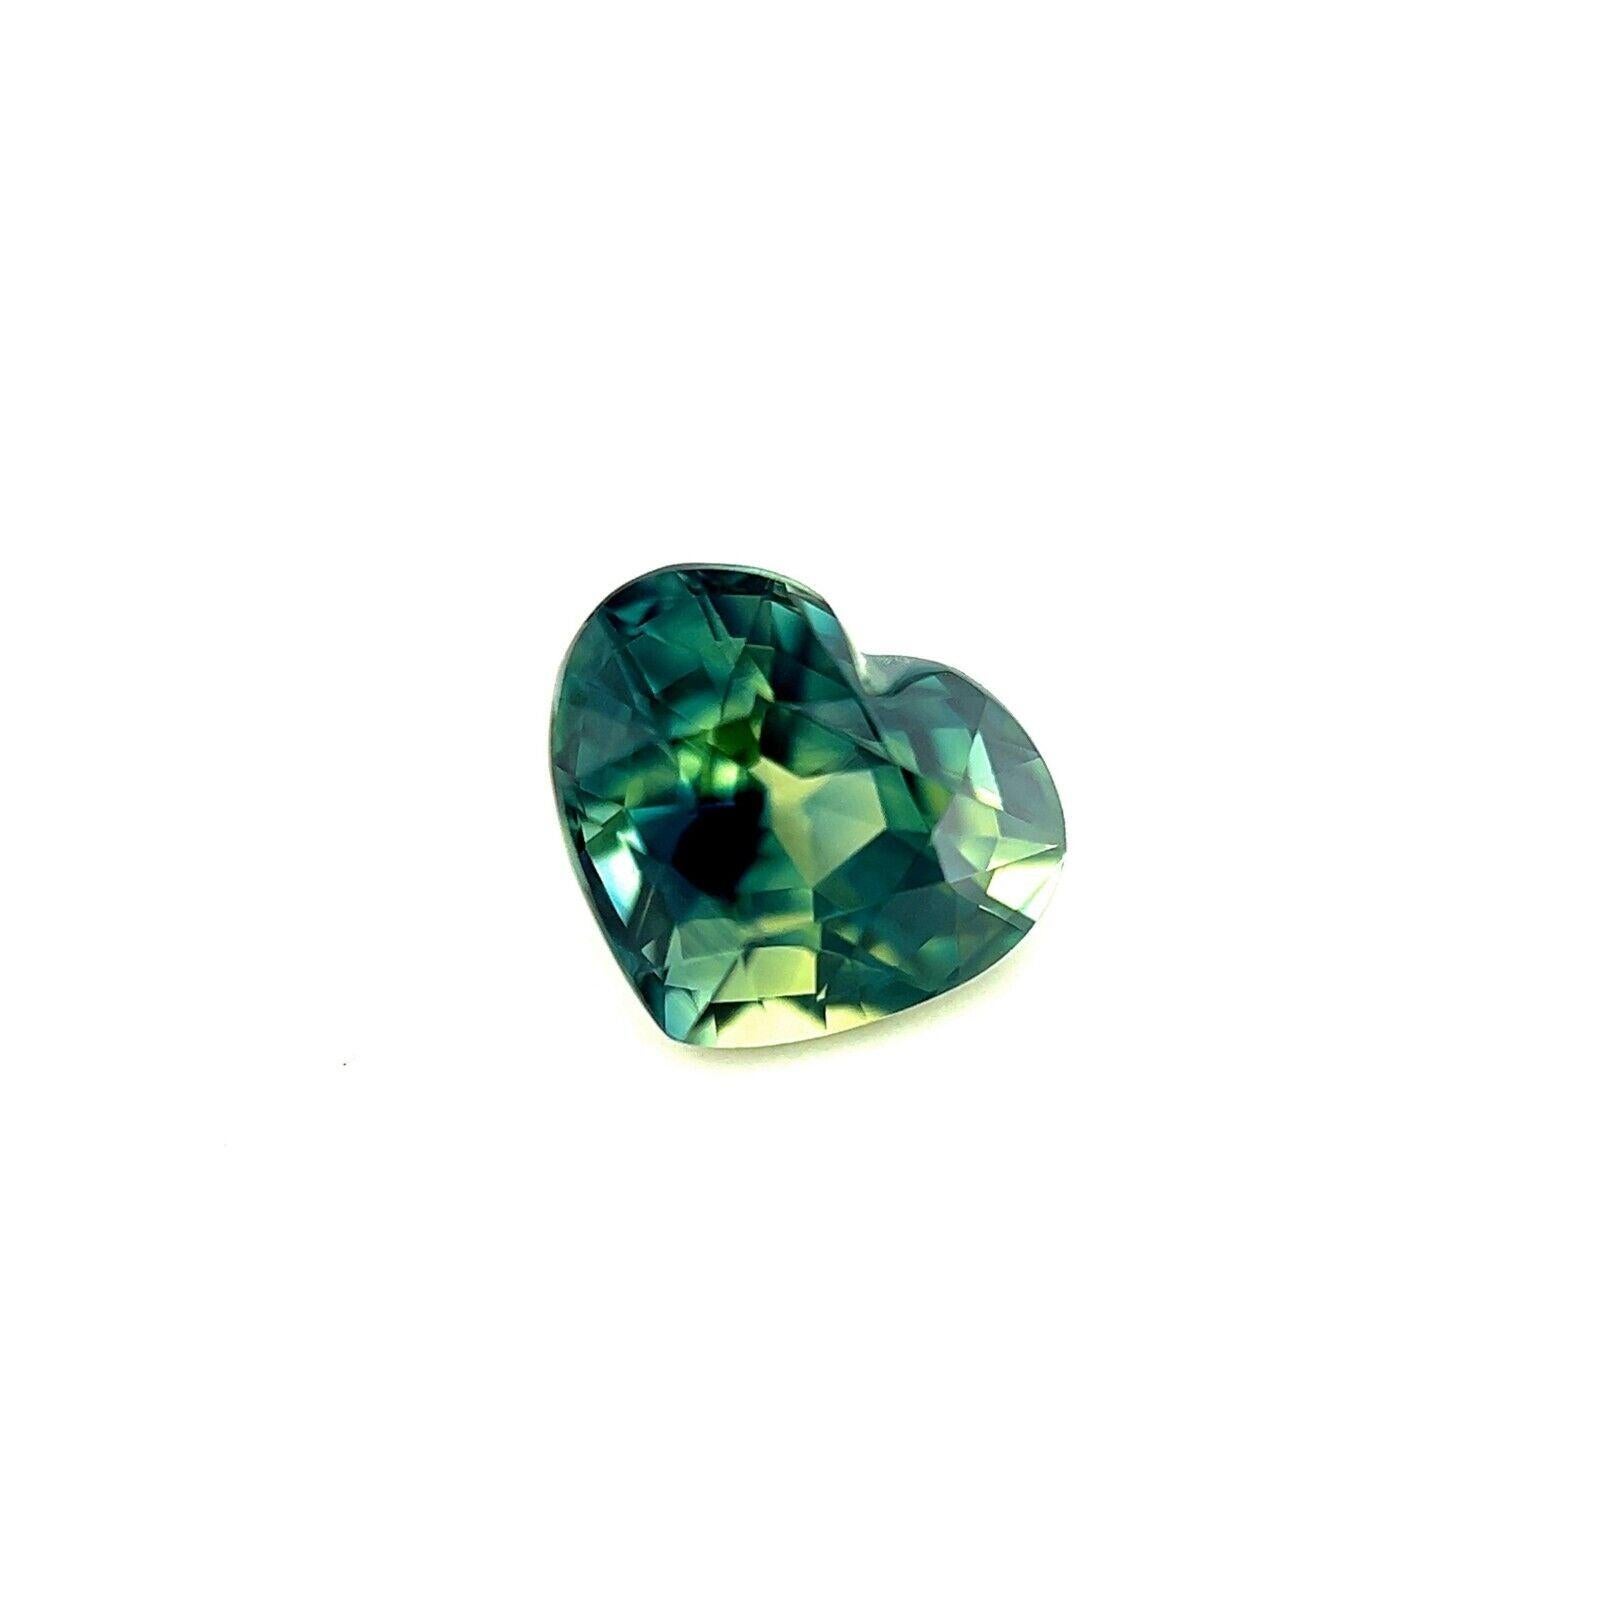 1.65Ct Natural Sapphire Vivid Blue Green Unique Heart Cut Rare Gem IF

Natural Unique Vivid Blue Green Heart Cut Sapphire Gemstone.
1.65 Carat with a beautiful vivid blue green colour and excellent clarity, practically flawless, IF.
Also has an